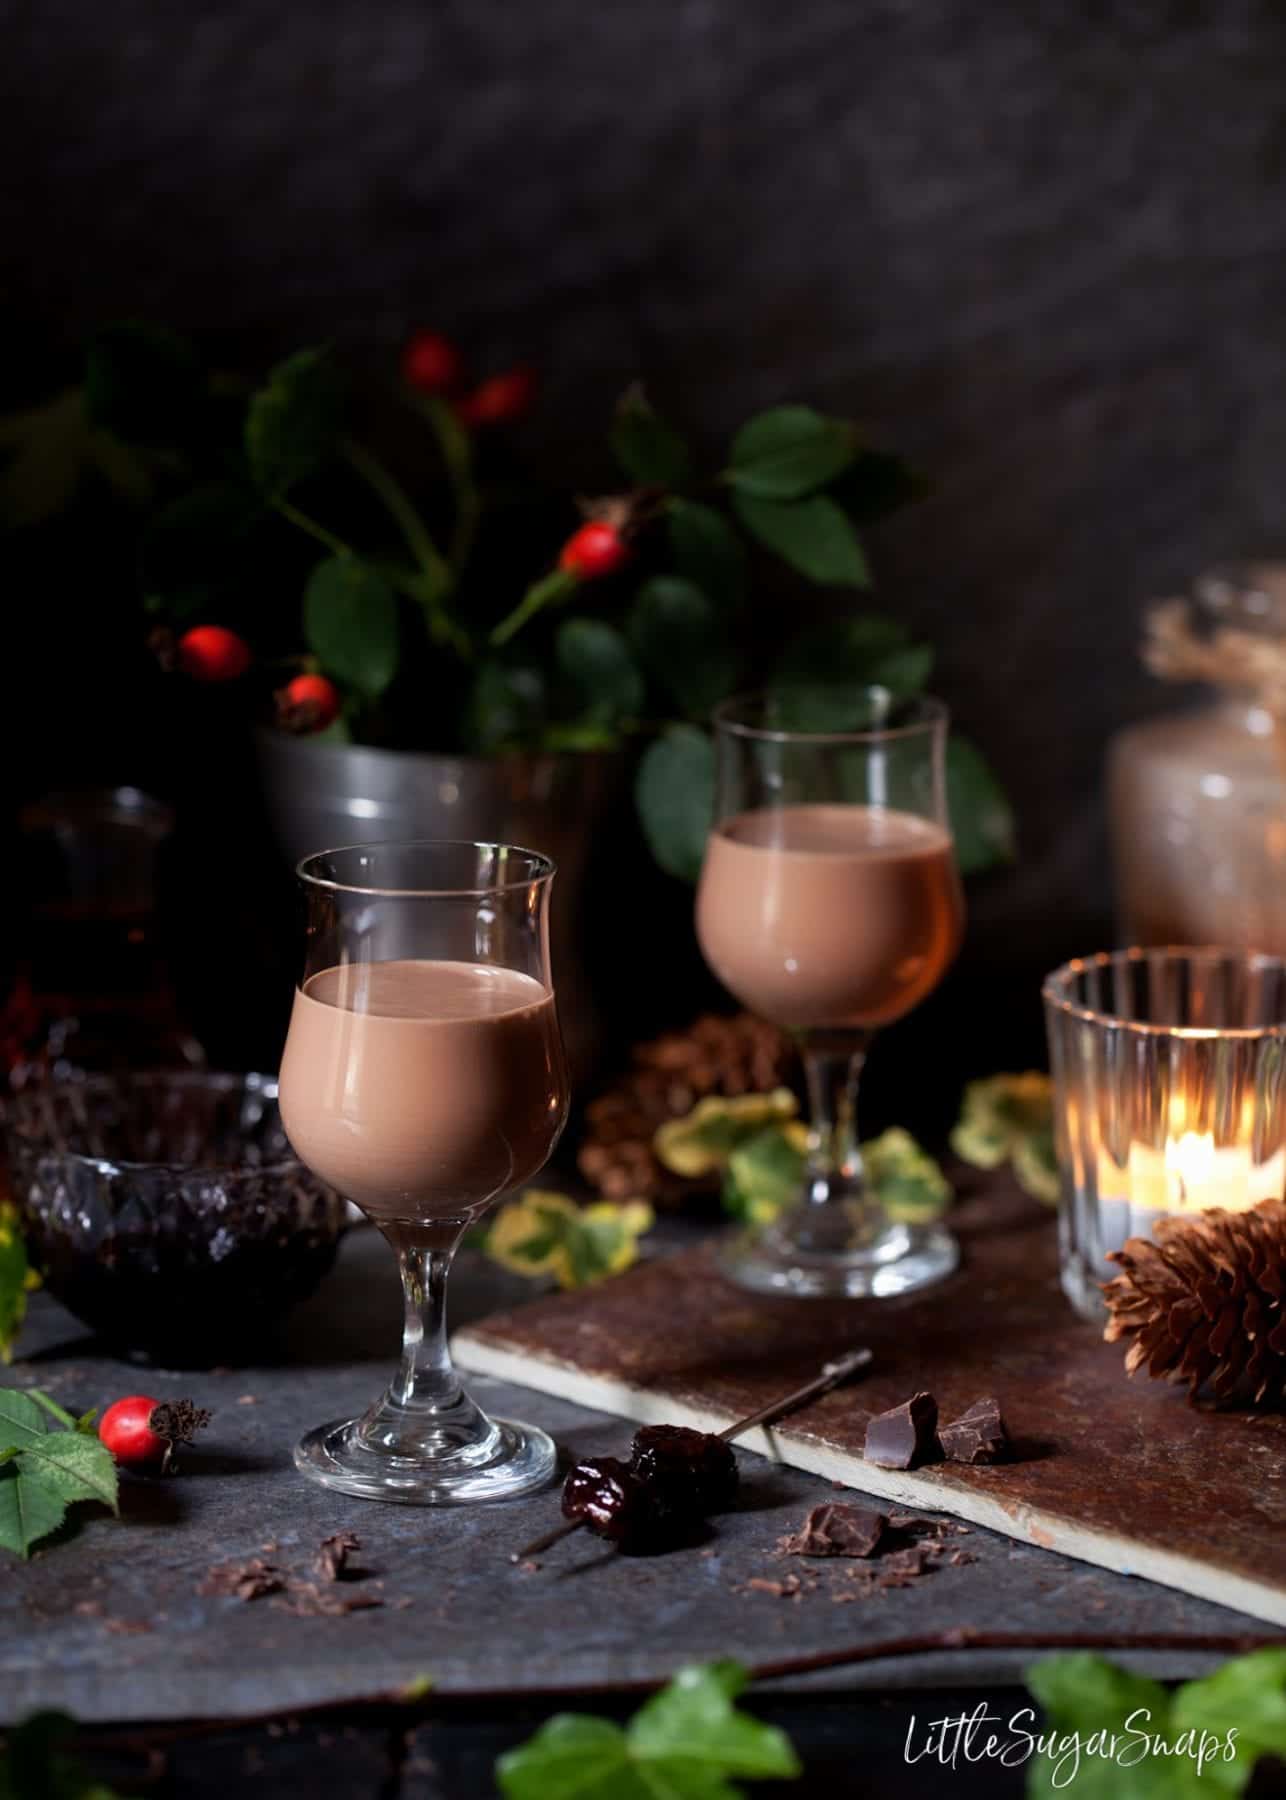 Two glasses filled with  alcoholic chocolate cream drink